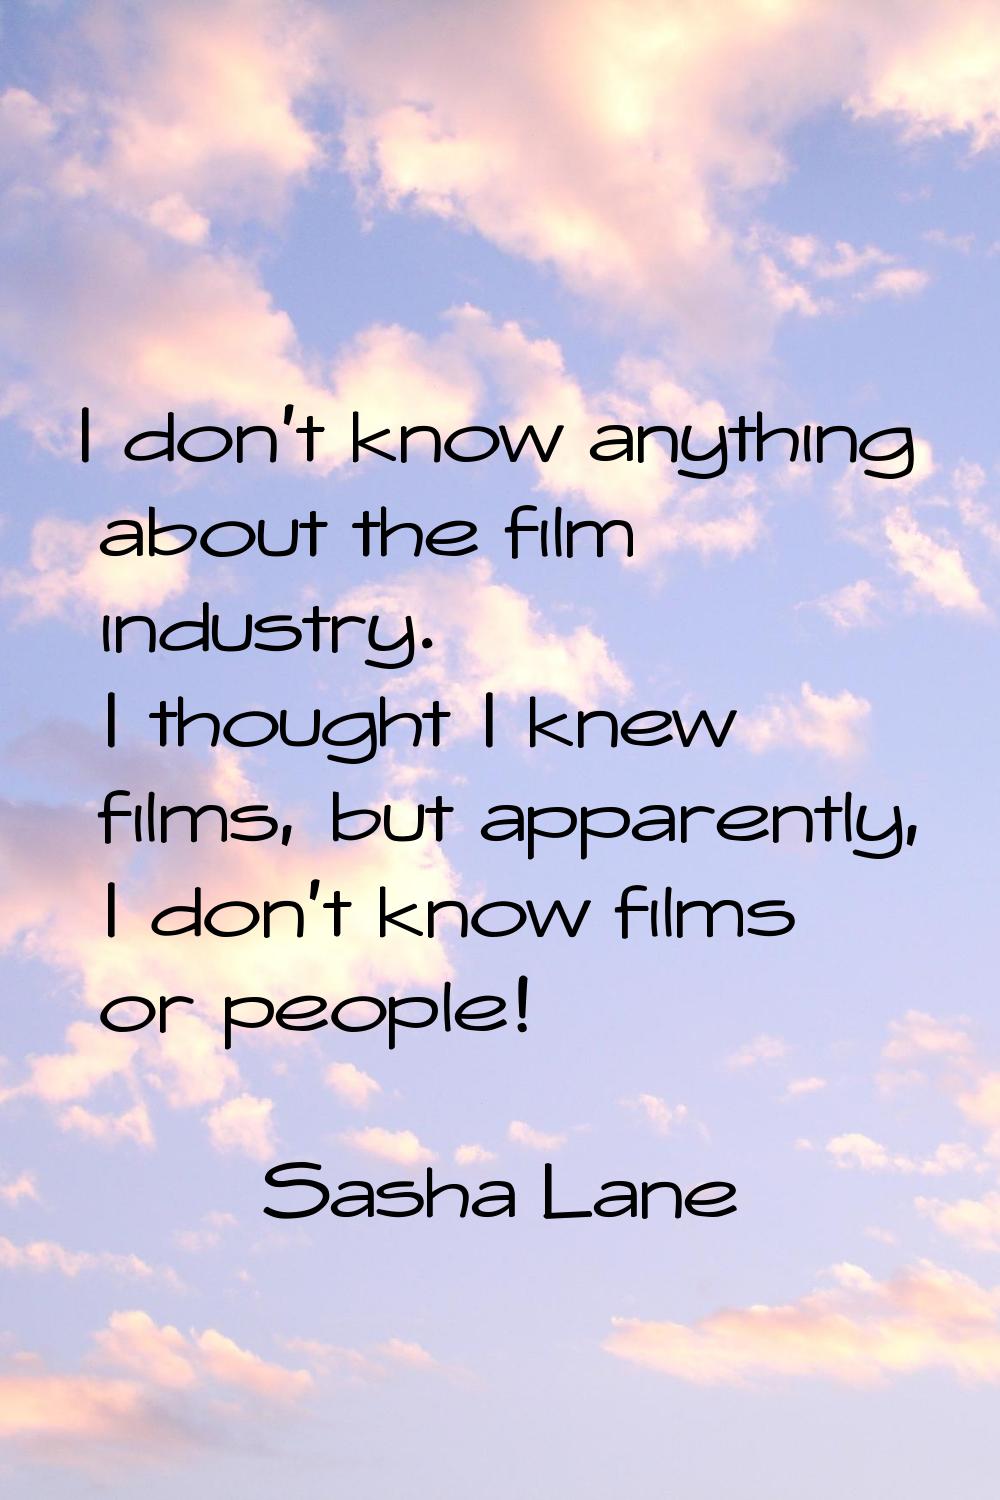 I don't know anything about the film industry. I thought I knew films, but apparently, I don't know